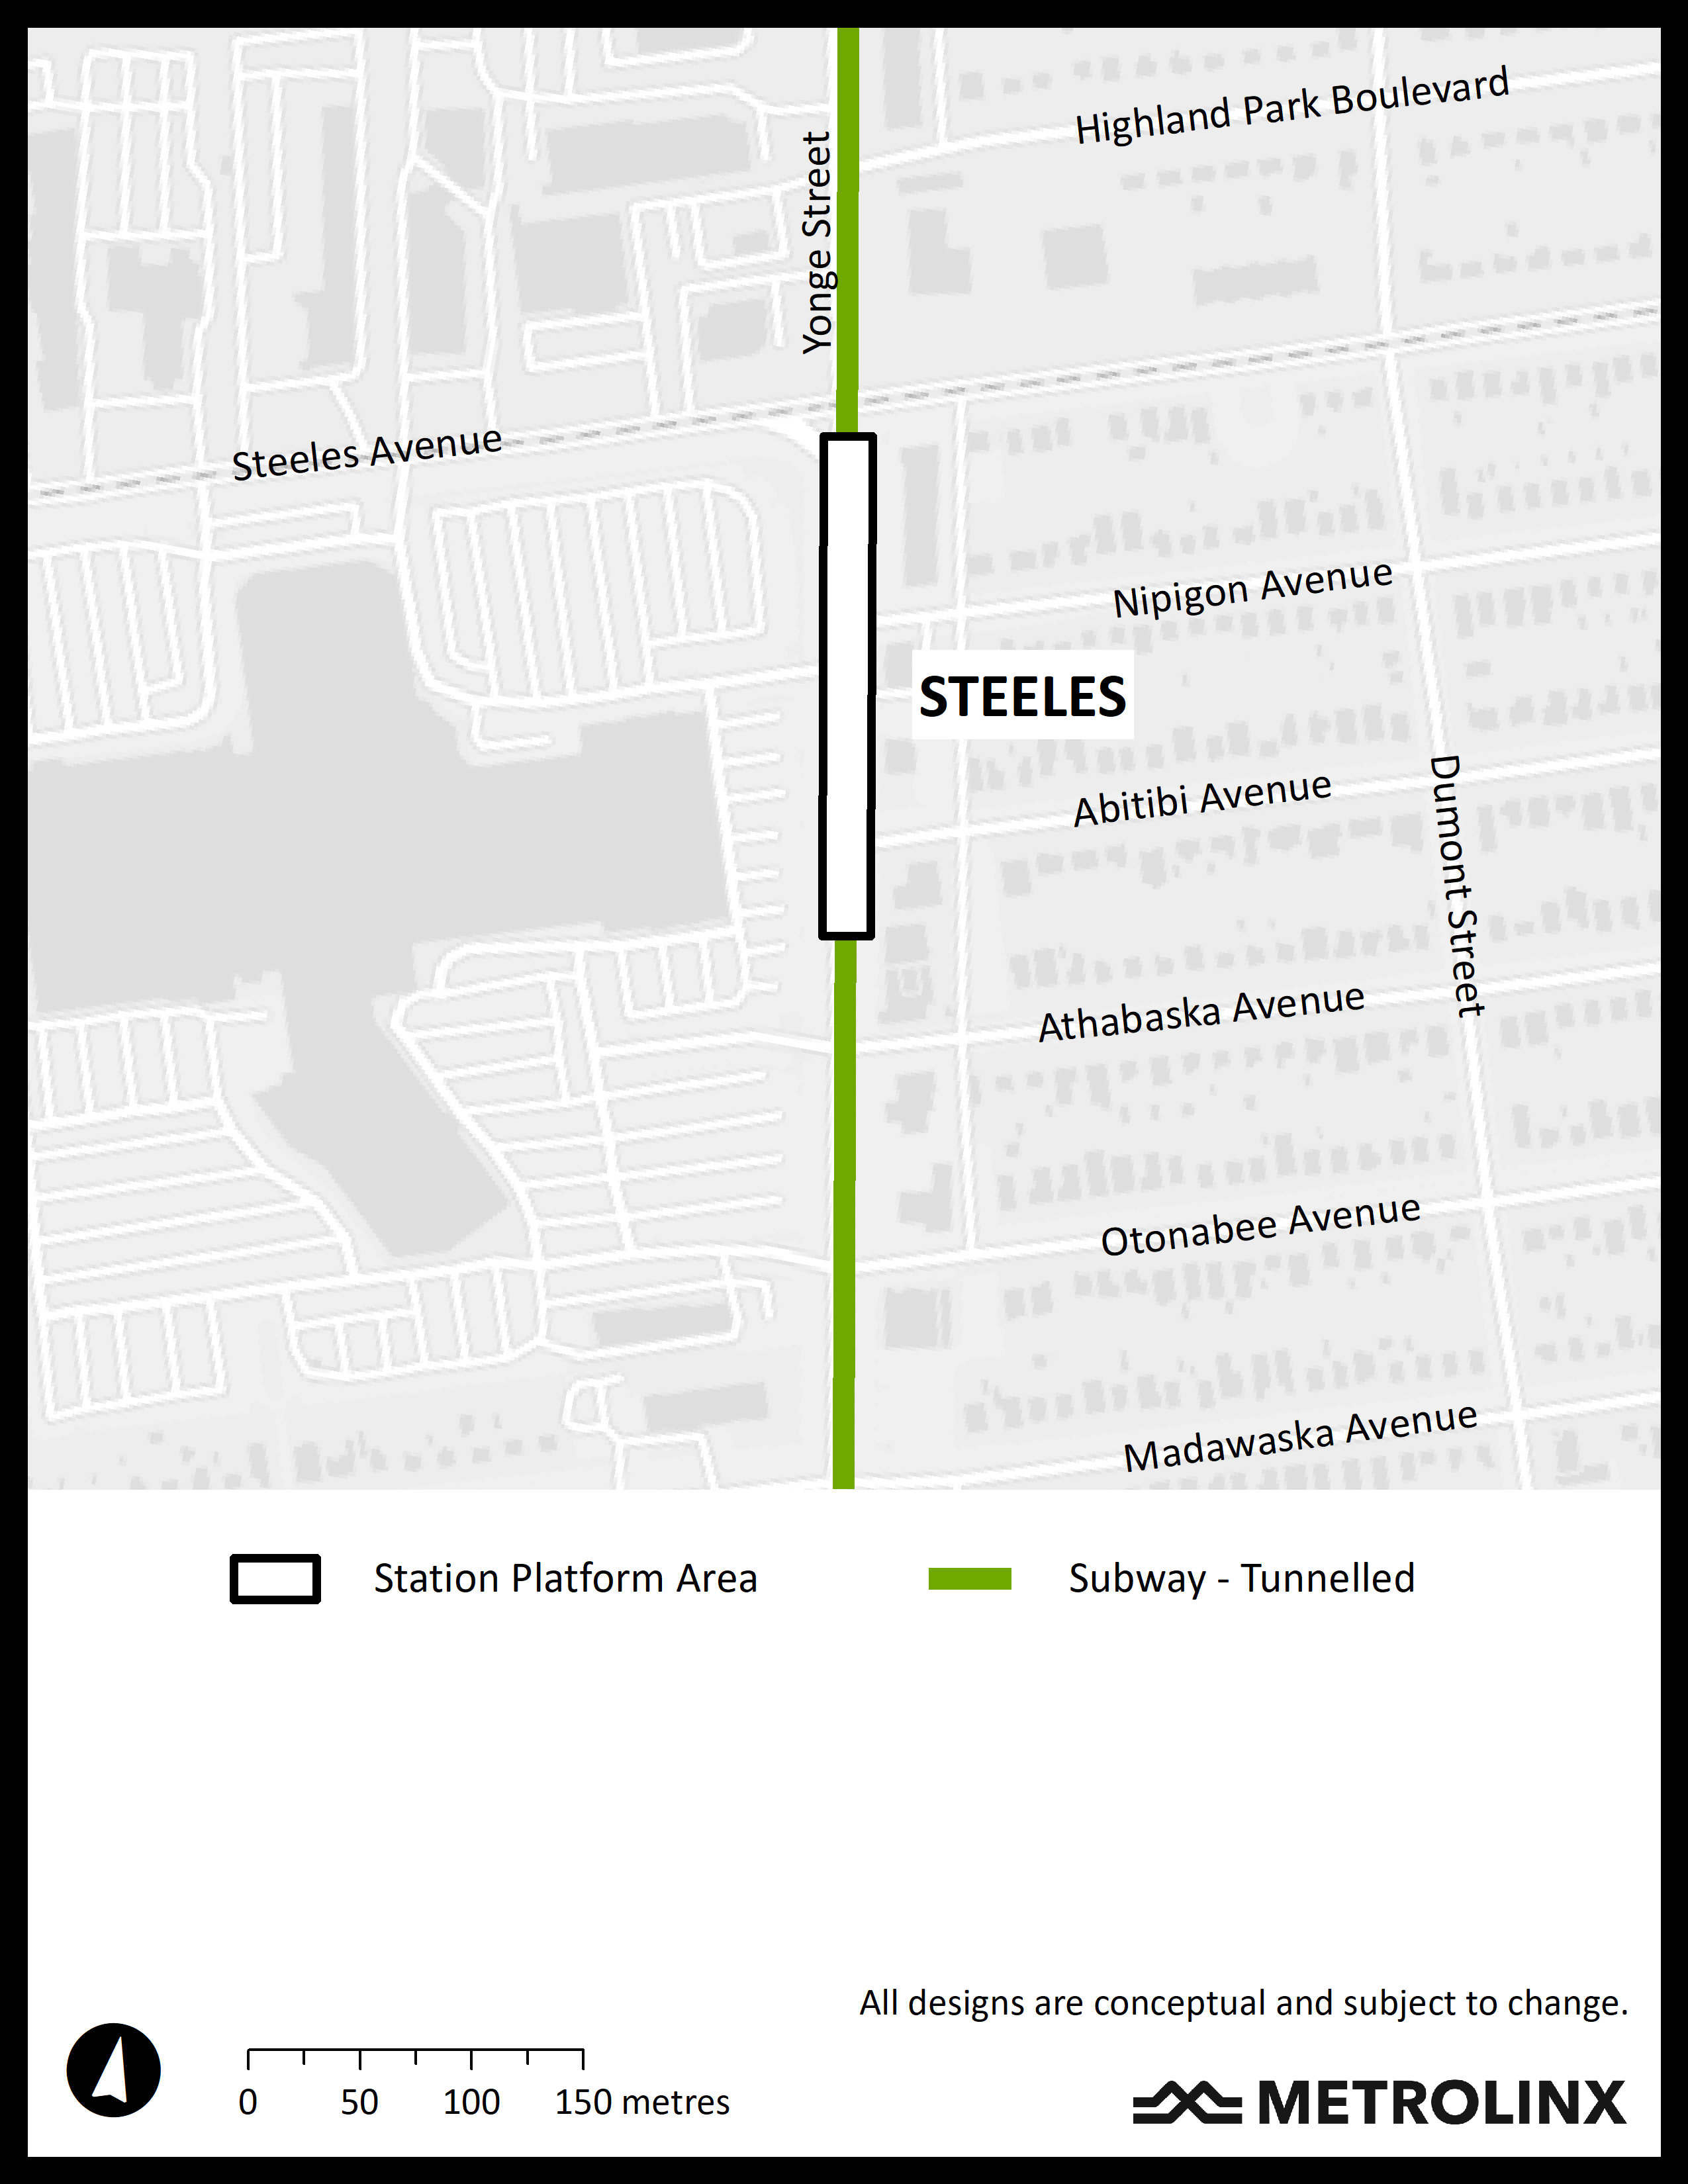 Image is a map of Steeles